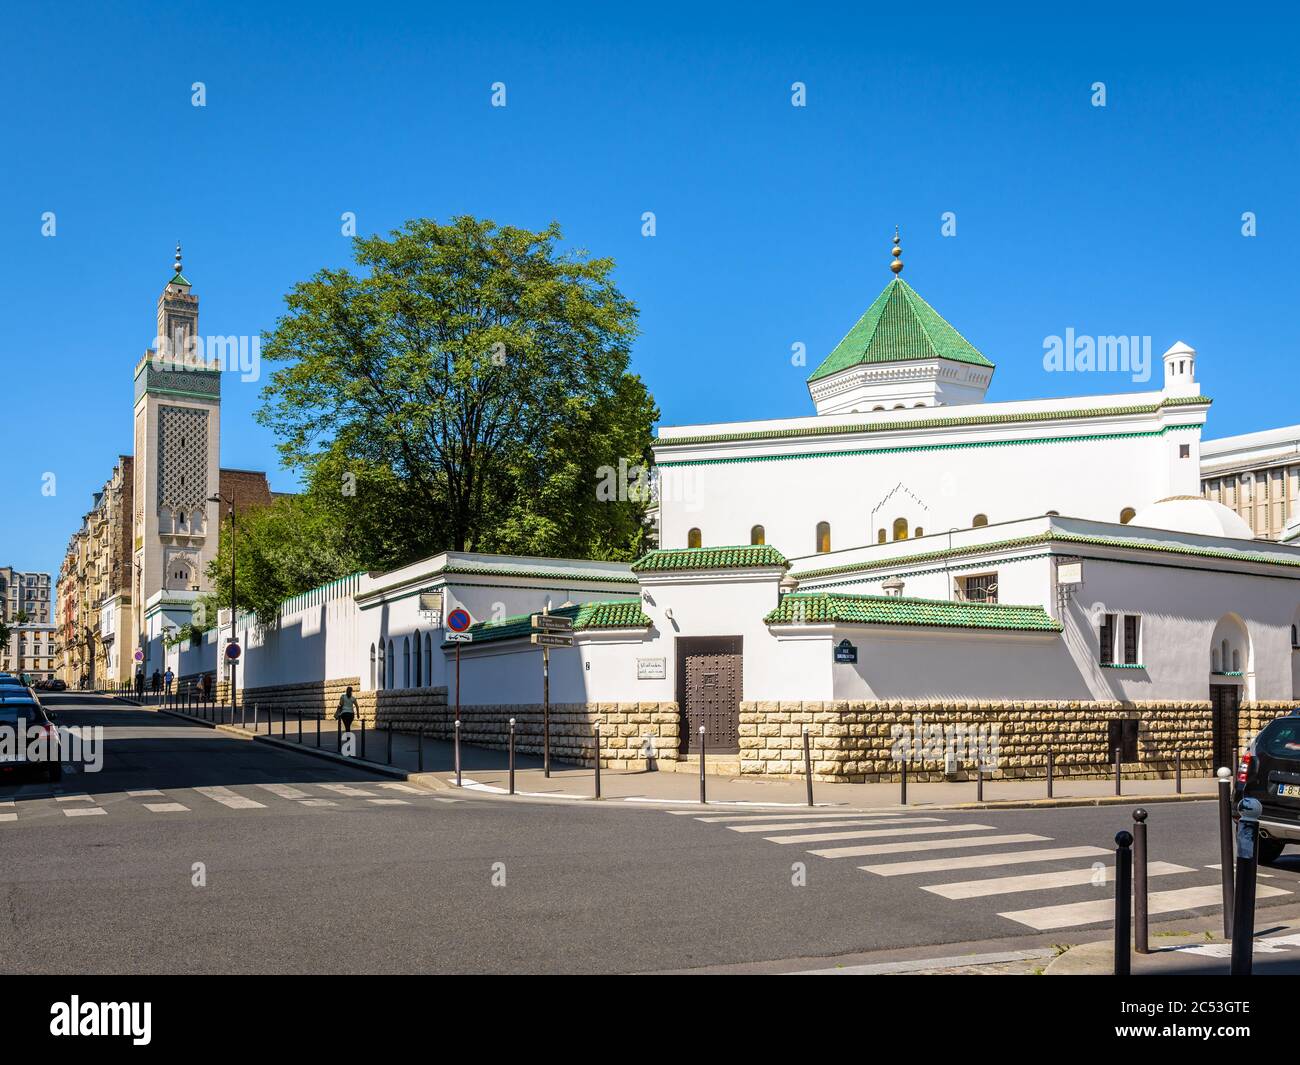 General view of the Great Mosque of Paris with the 33-meter high minaret on the left and the prayer hall topped by a dome with green tiles on the righ Stock Photo